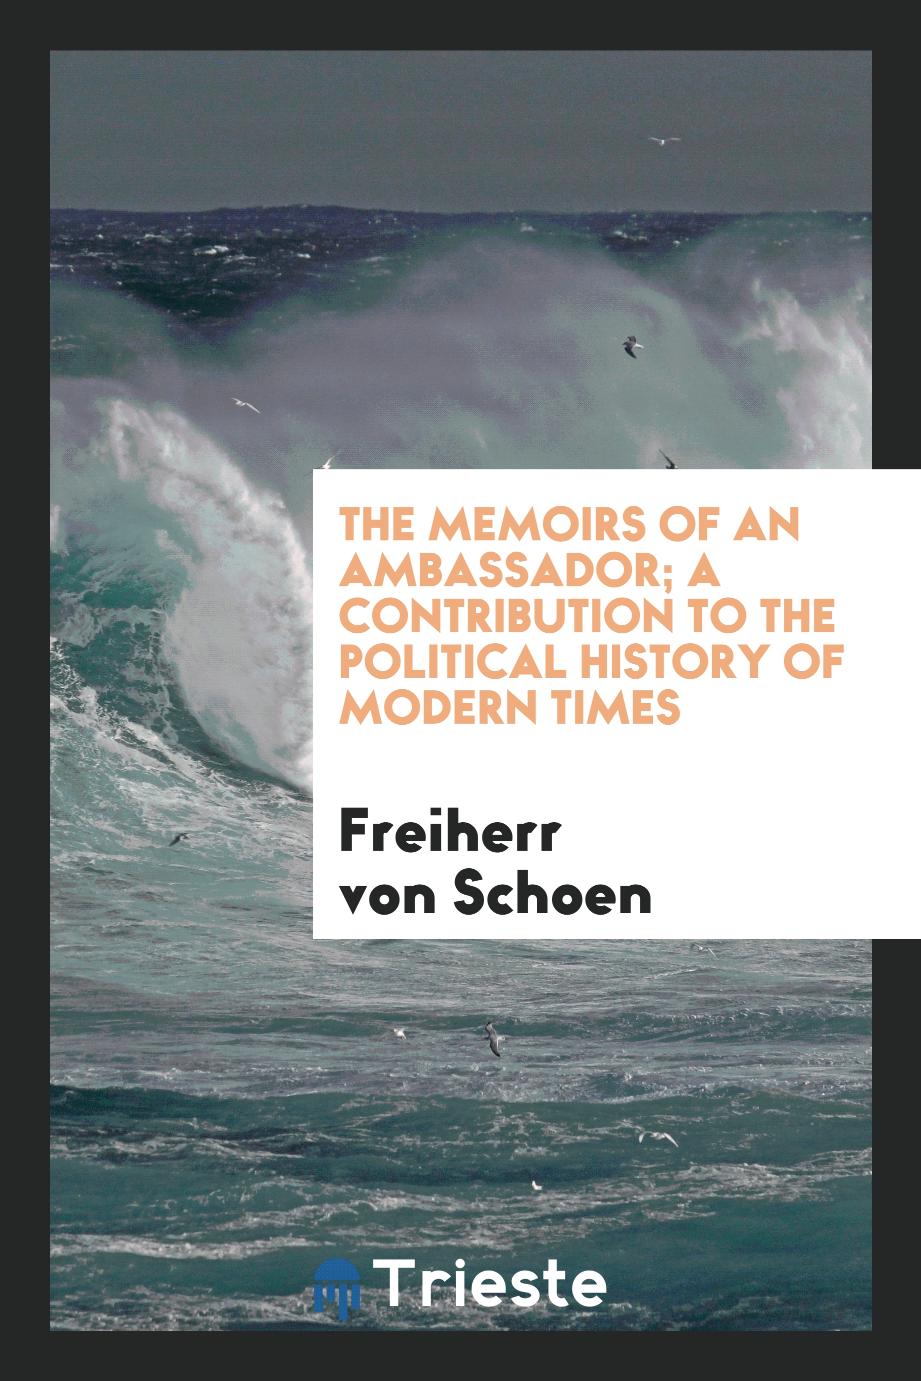 The memoirs of an ambassador; a contribution to the political history of modern times